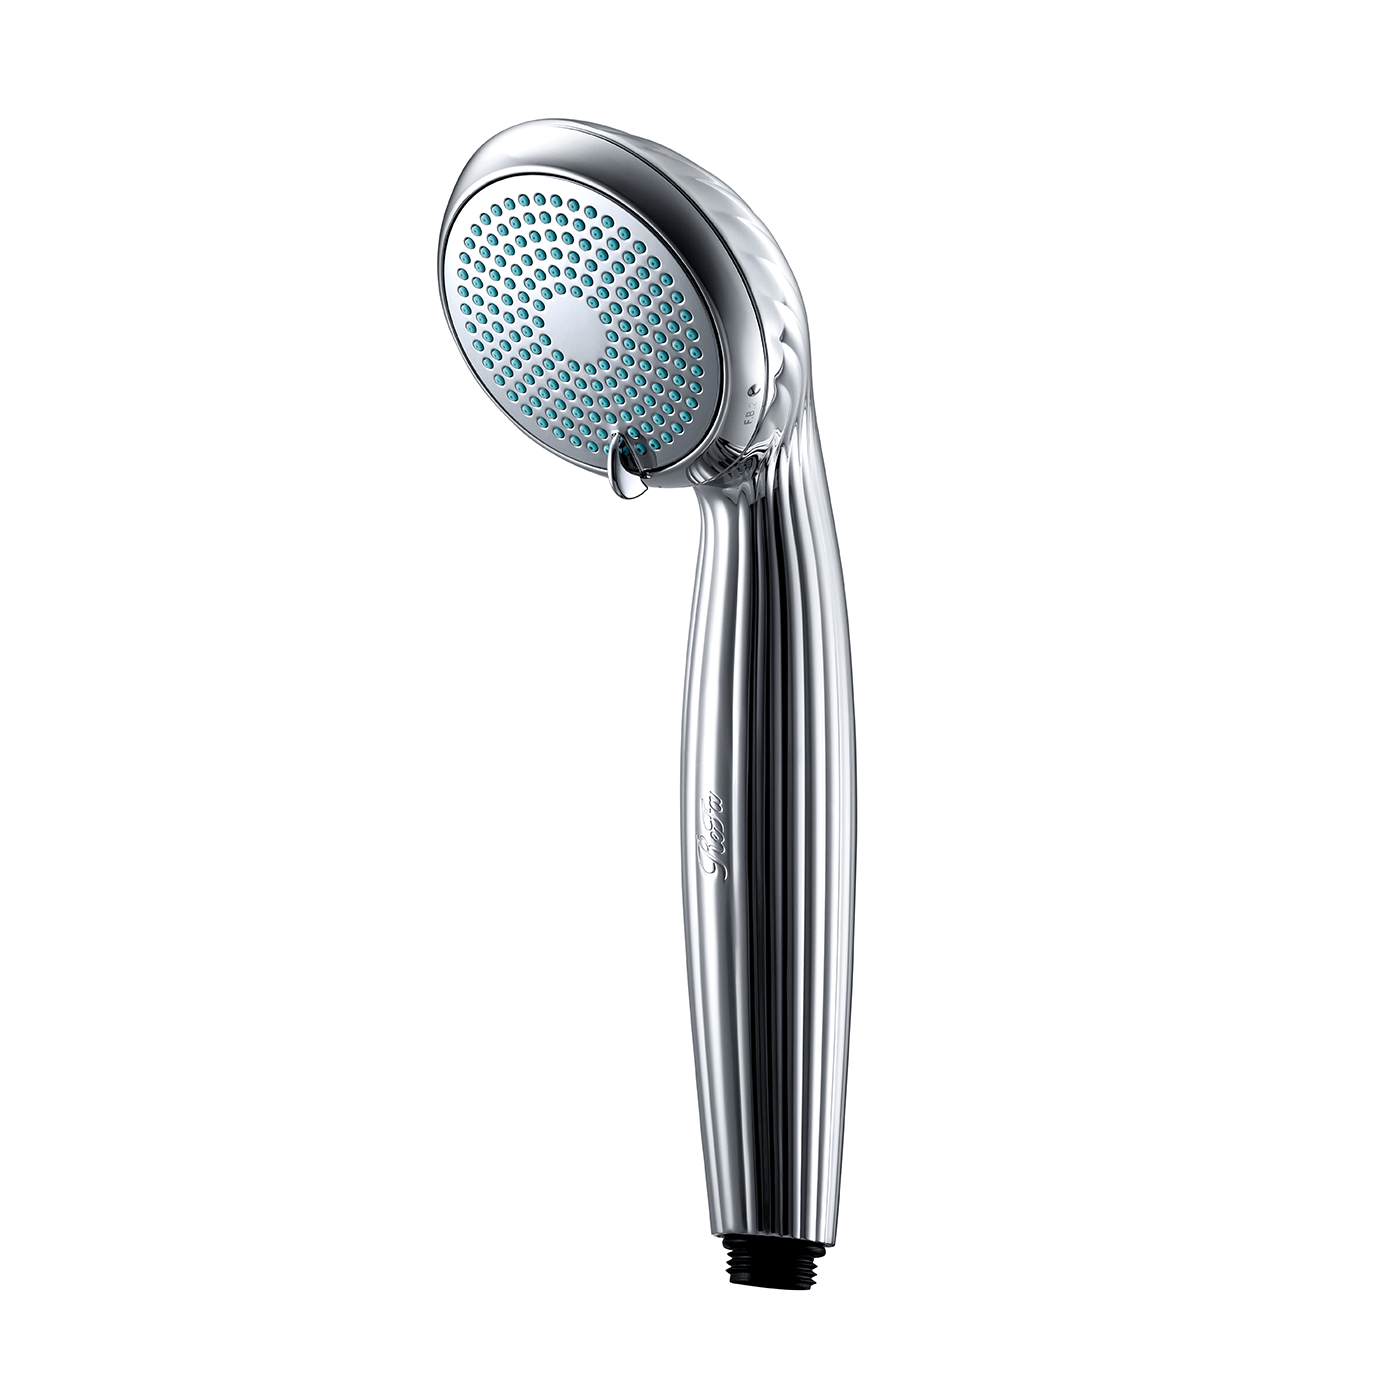 Introducing ReFa FINE BUBBLE ONE, a revolutionary showerhead with fine bubbles that gently cleanse, warm, and hydrate.